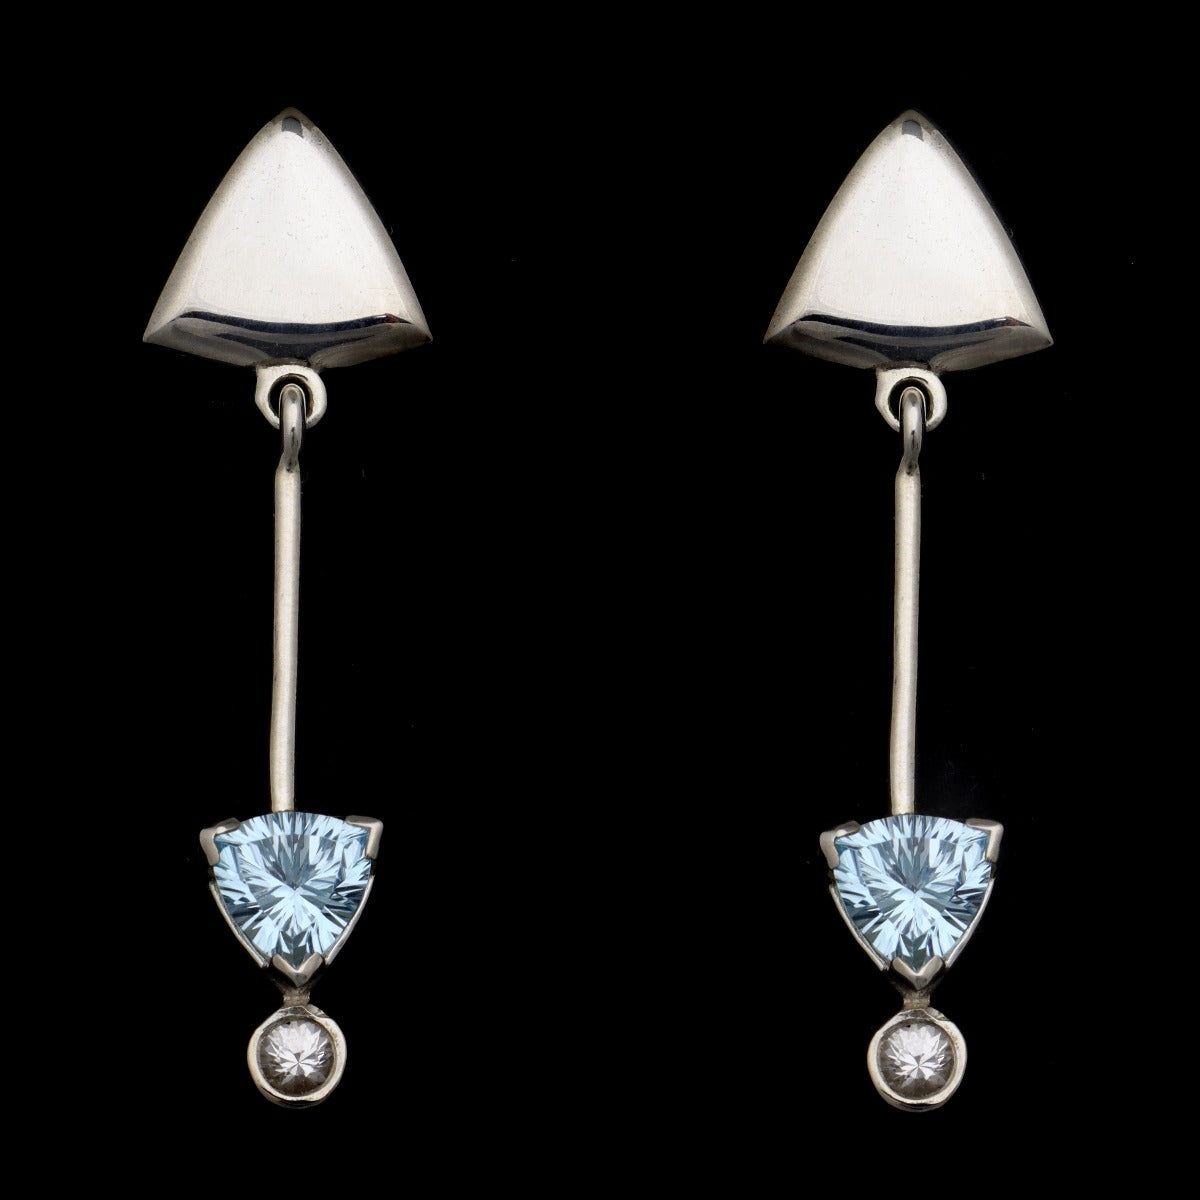 Sam Patania Collection - "Brilliant Trillion T&R" Blue Topaz and Sterling Silver Earrings, 2" x 0.625" (J91699-1020-043)
